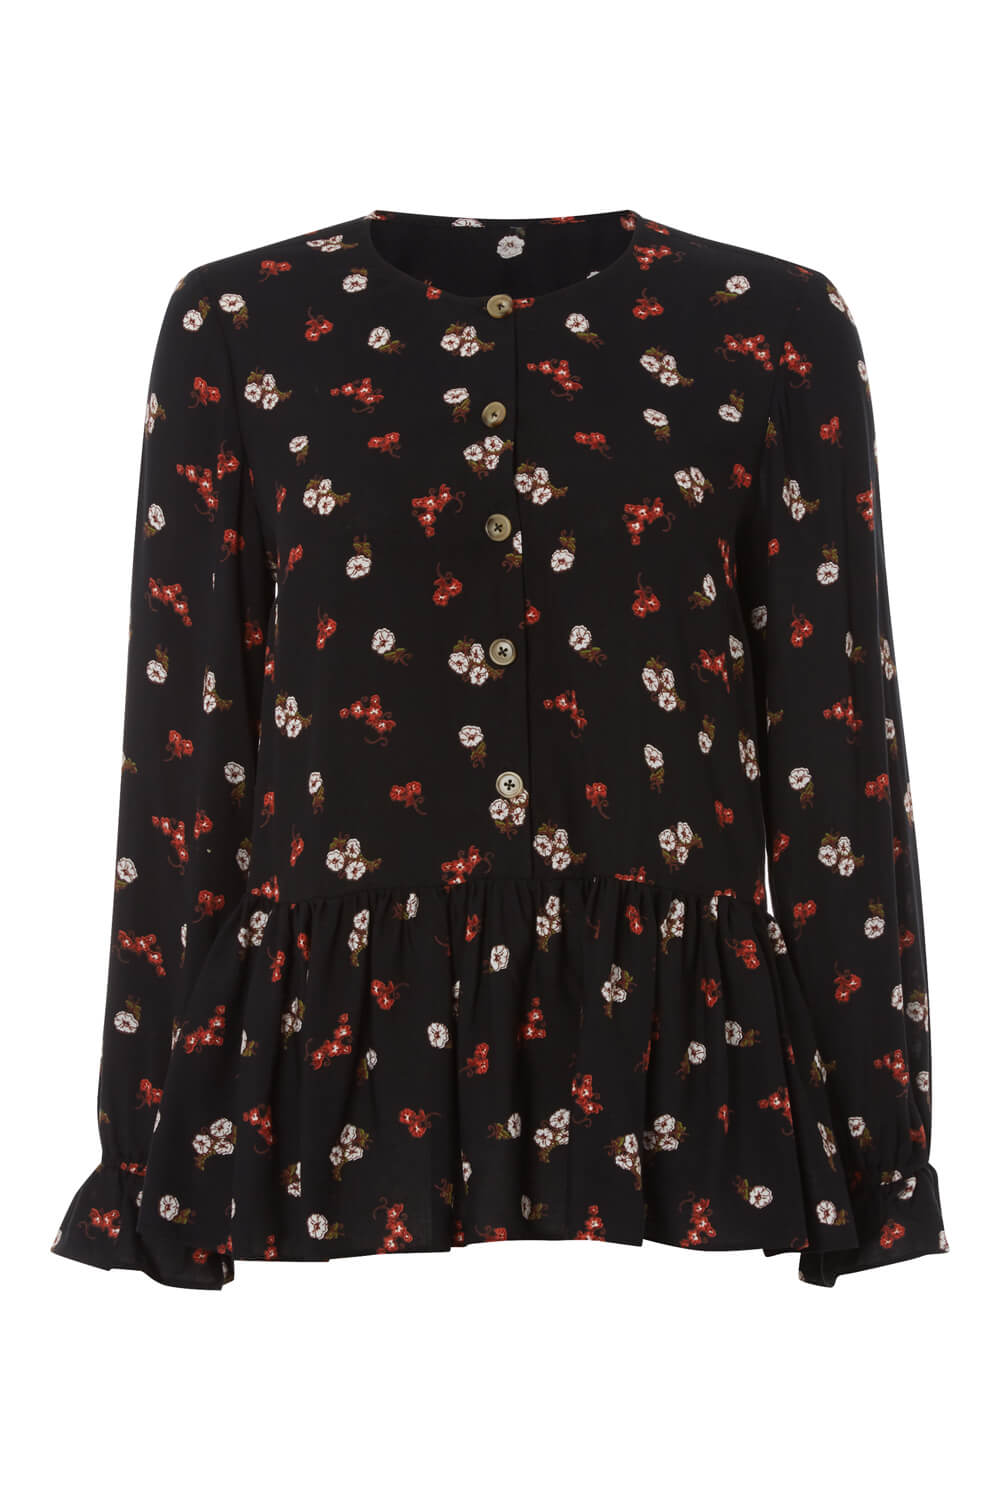 Red Floral Button Front Peplum Top, Image 4 of 4